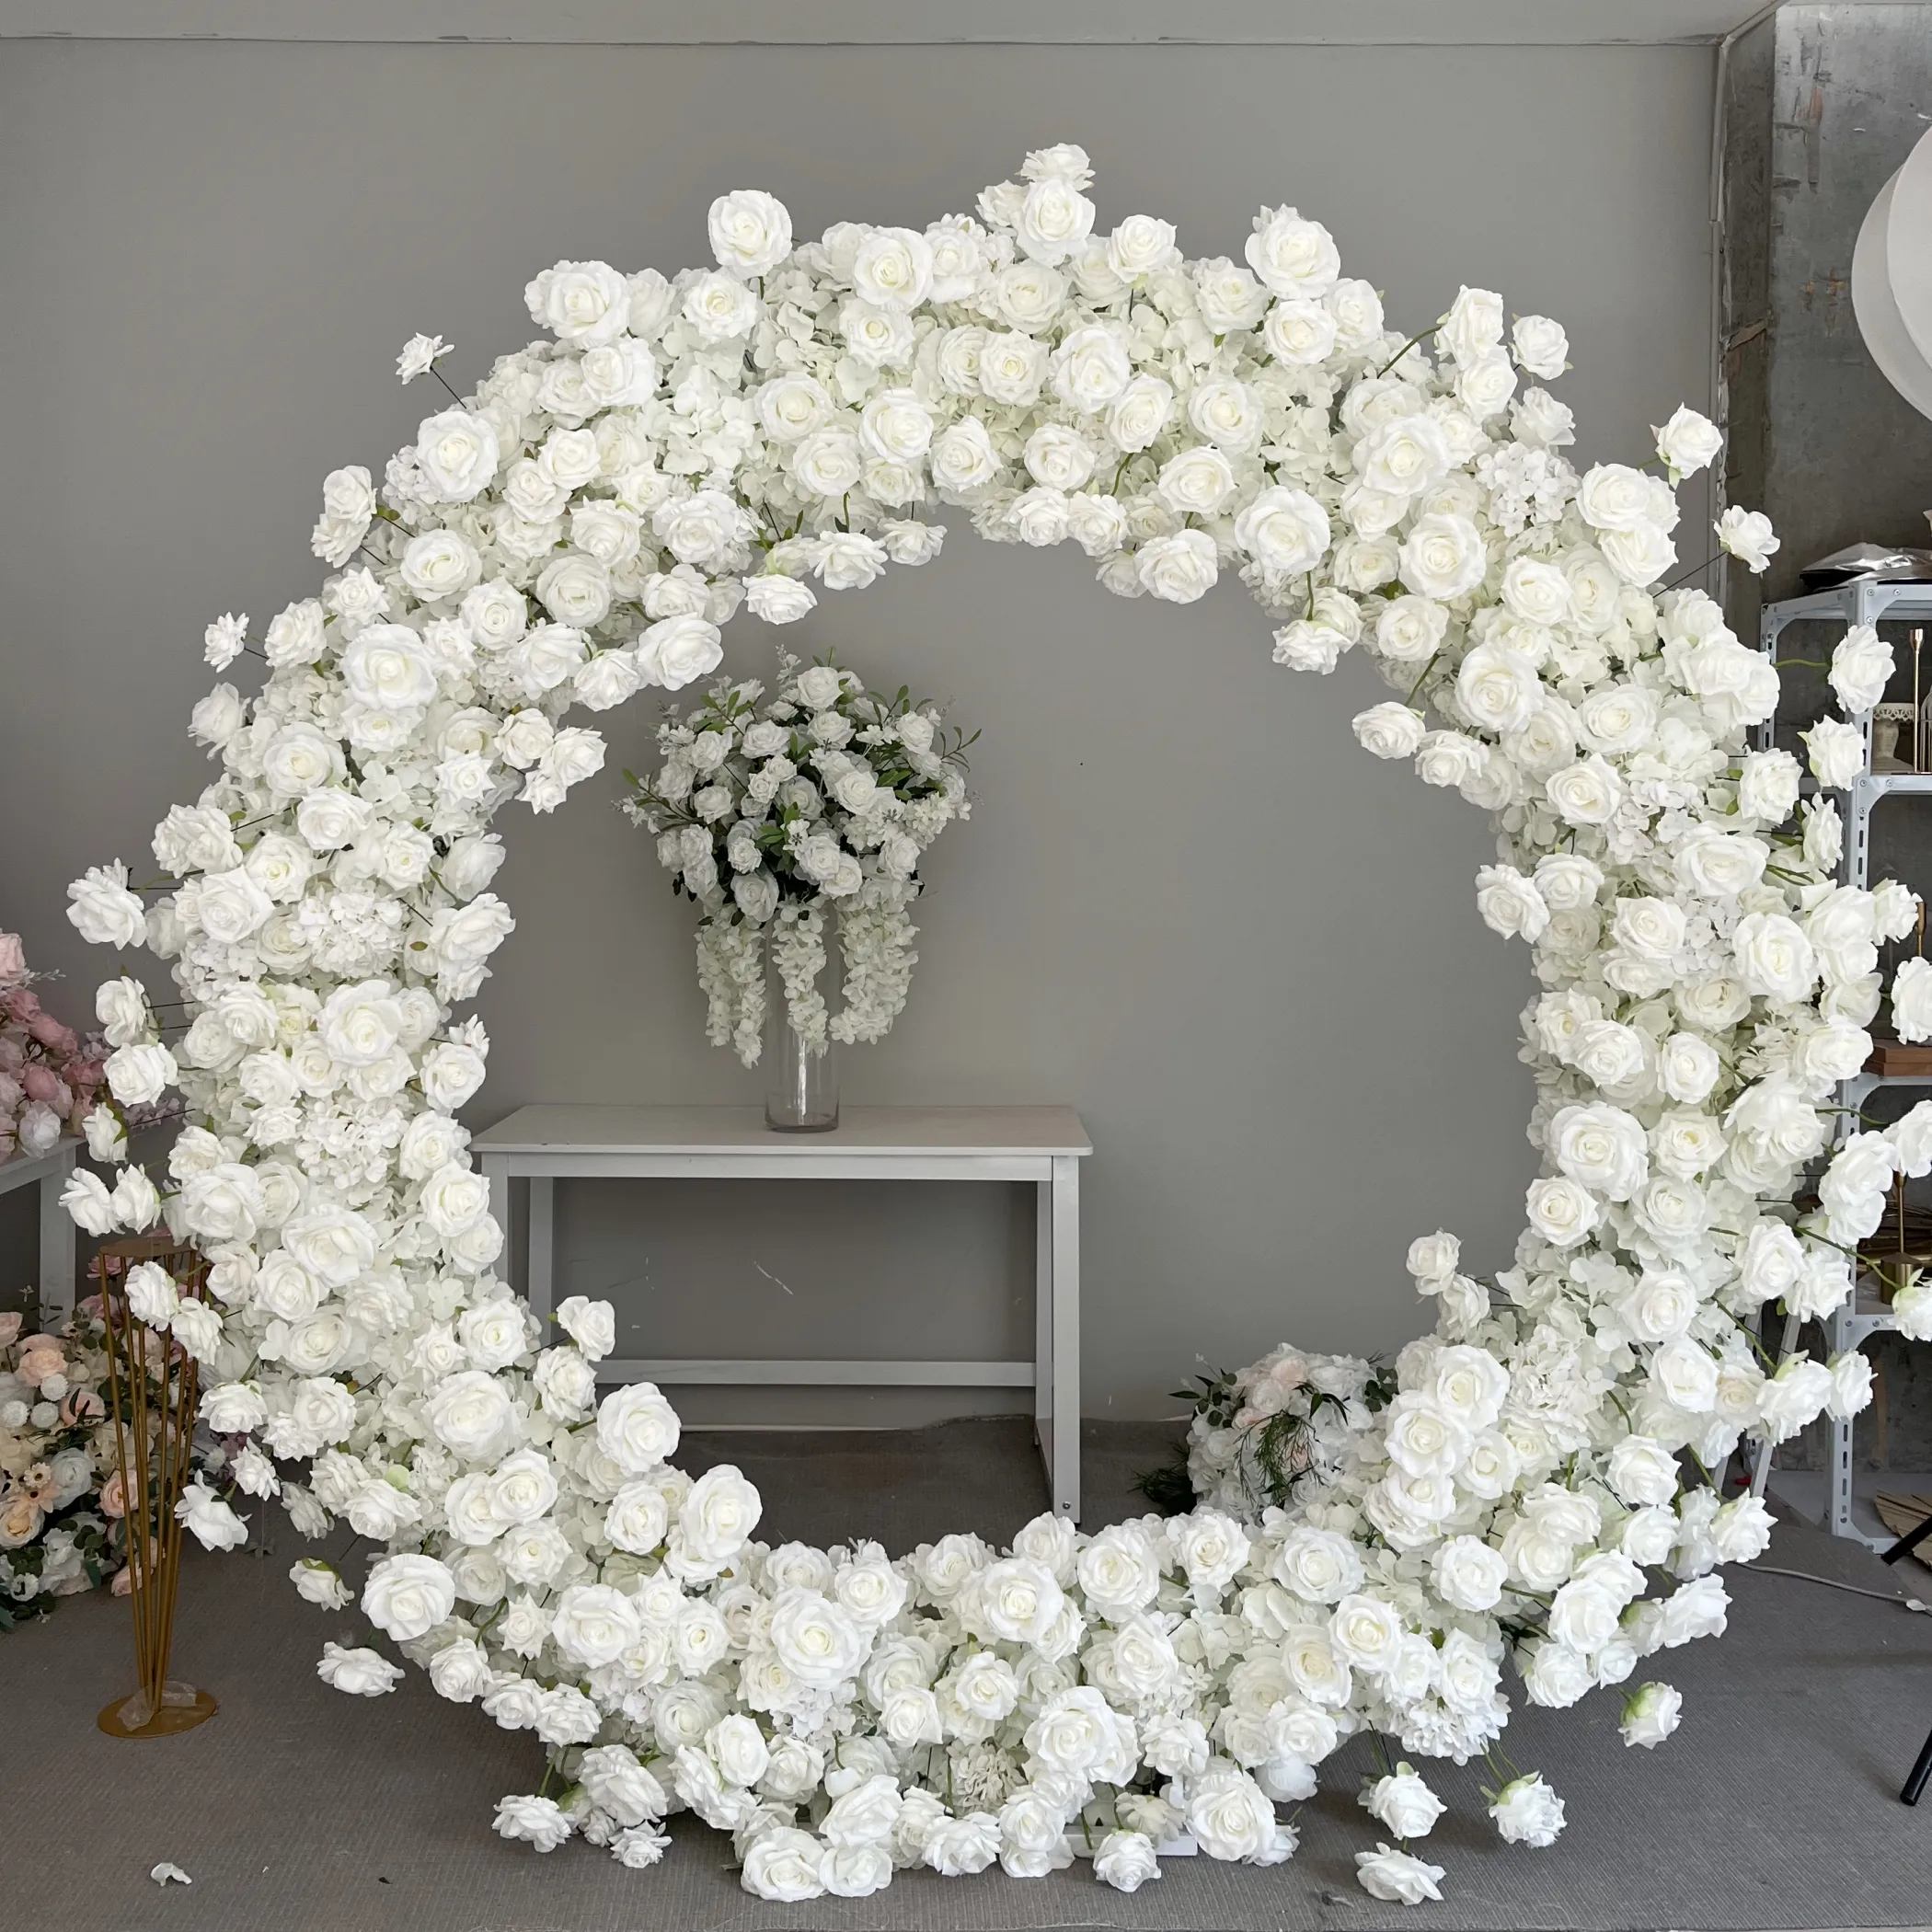 Wedding Simulation White Silk Flowers High Quality Flowers Centerpieces Round Church Backdrop Designs Decoration Items for Event